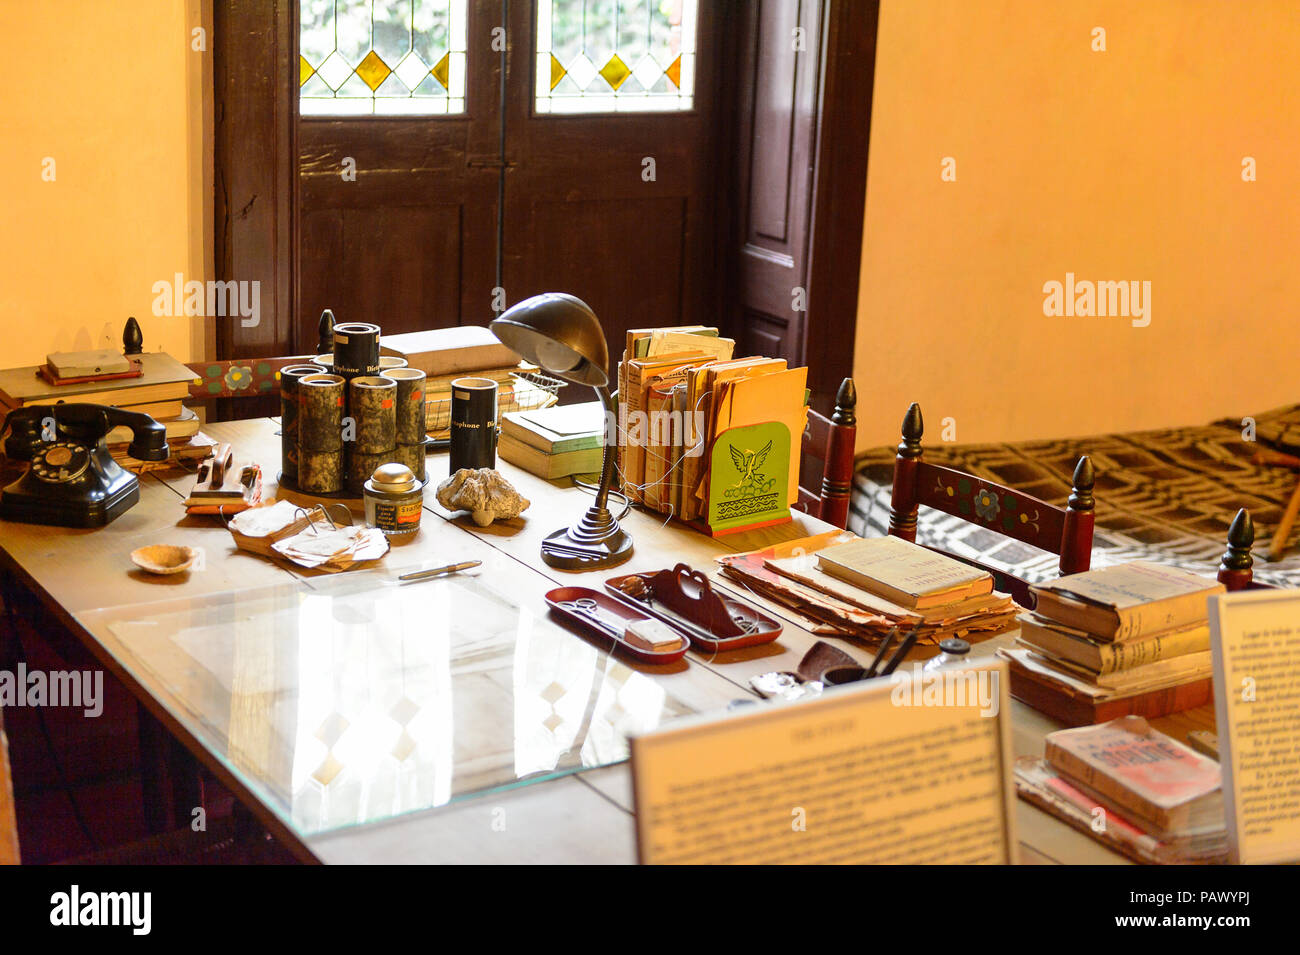 COYOACAN, MEXICO - OCT 28, 2016: Working desk, Leon Trotsky House Museum, a place honoring Lev Davidovich Trotskiy and an organization that works to p Stock Photo